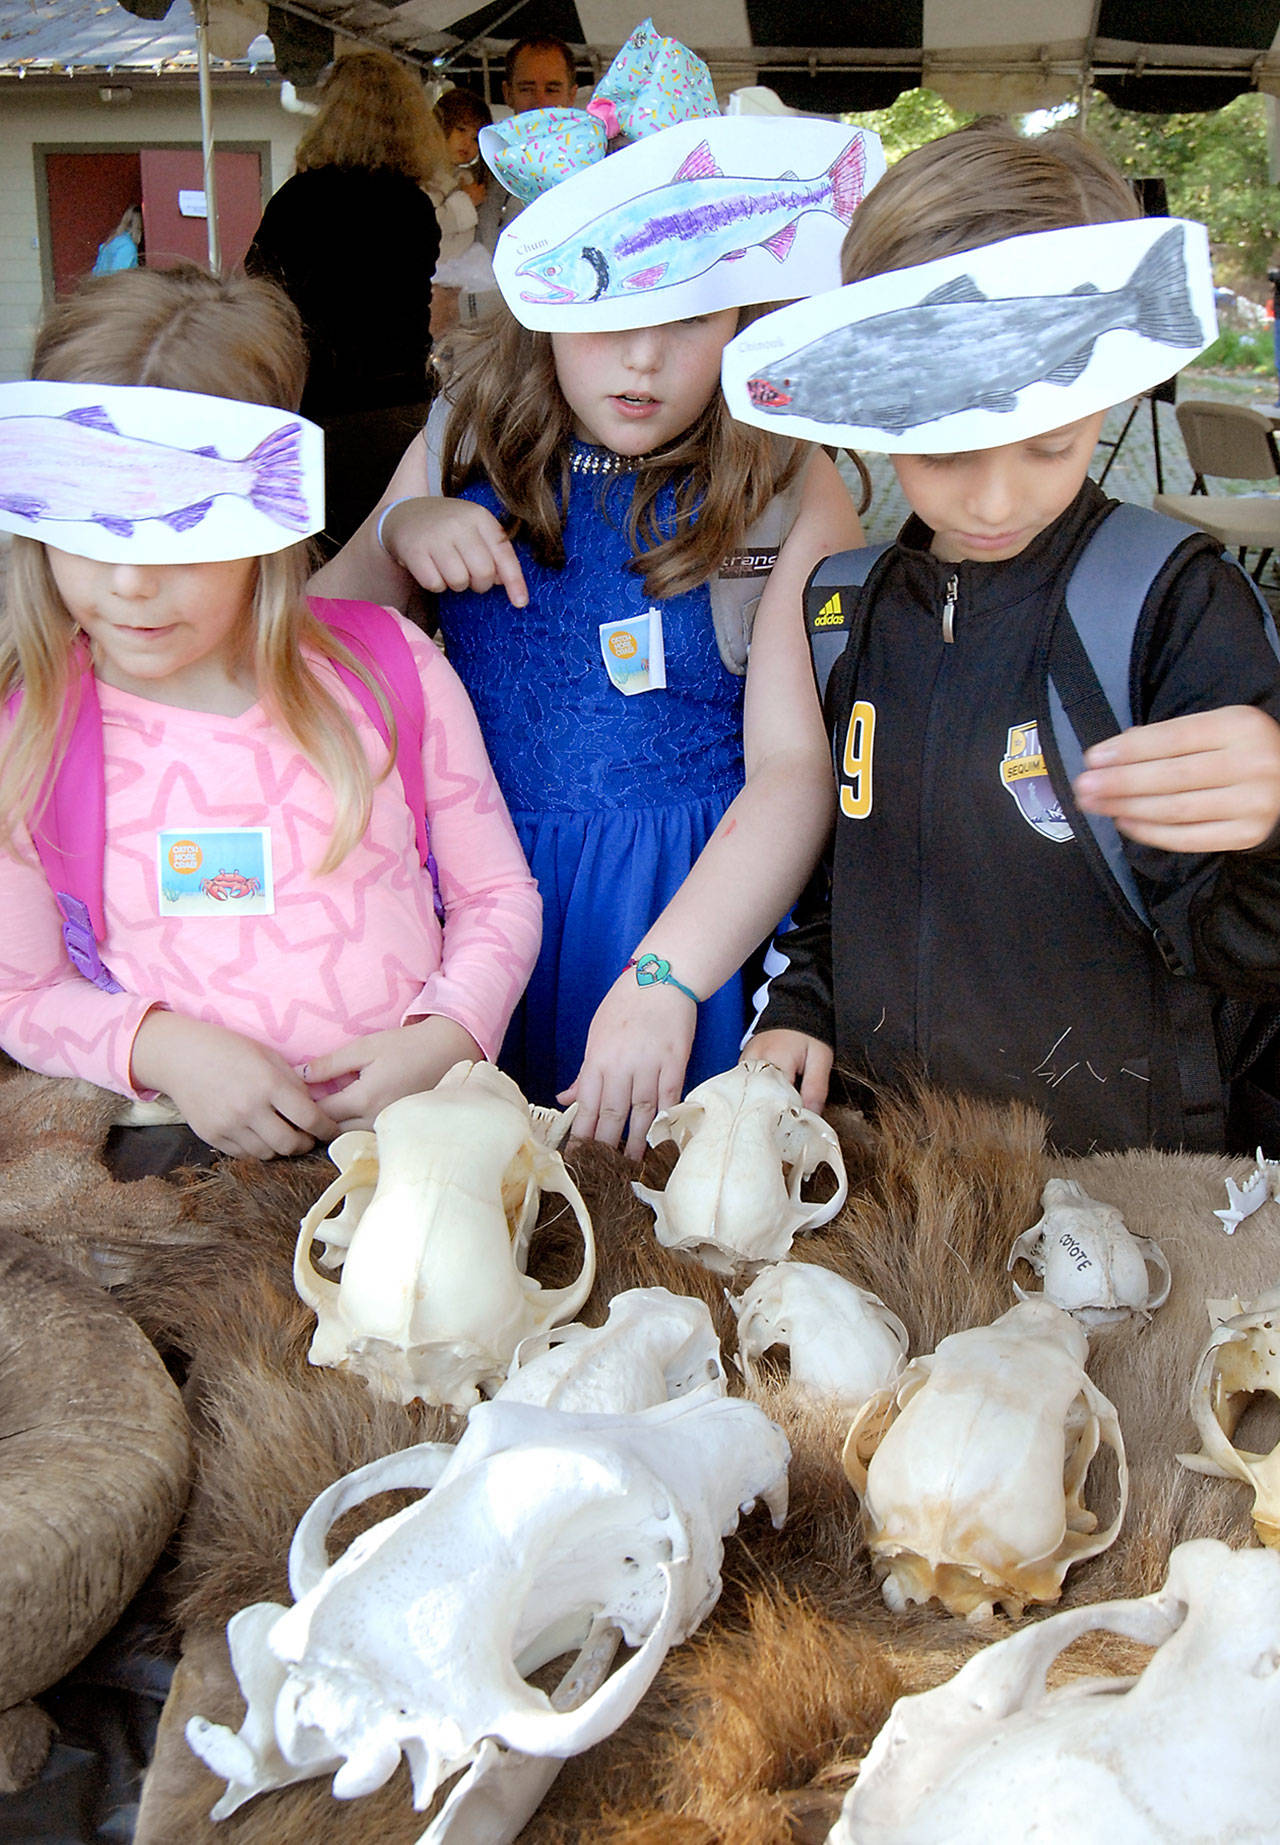 Helen Haller School third graders, from left, Alyssa Lami, Kyra Hartlein and Benaiah Selkklmeyer look over simulated skulls of Pacific Northwest creatures at a traveling display from the Washington Department of Fish and Wildlife as part of the Dungeness River Fest on Friday at Railroad Bridge Park in Sequim. The event, hosted by the Dungeness River Audubon Society, featured a variety of exhibits and activities promoting the natural world and the preservation of the river. (Keith Thorpe/Peninsula Daily News)